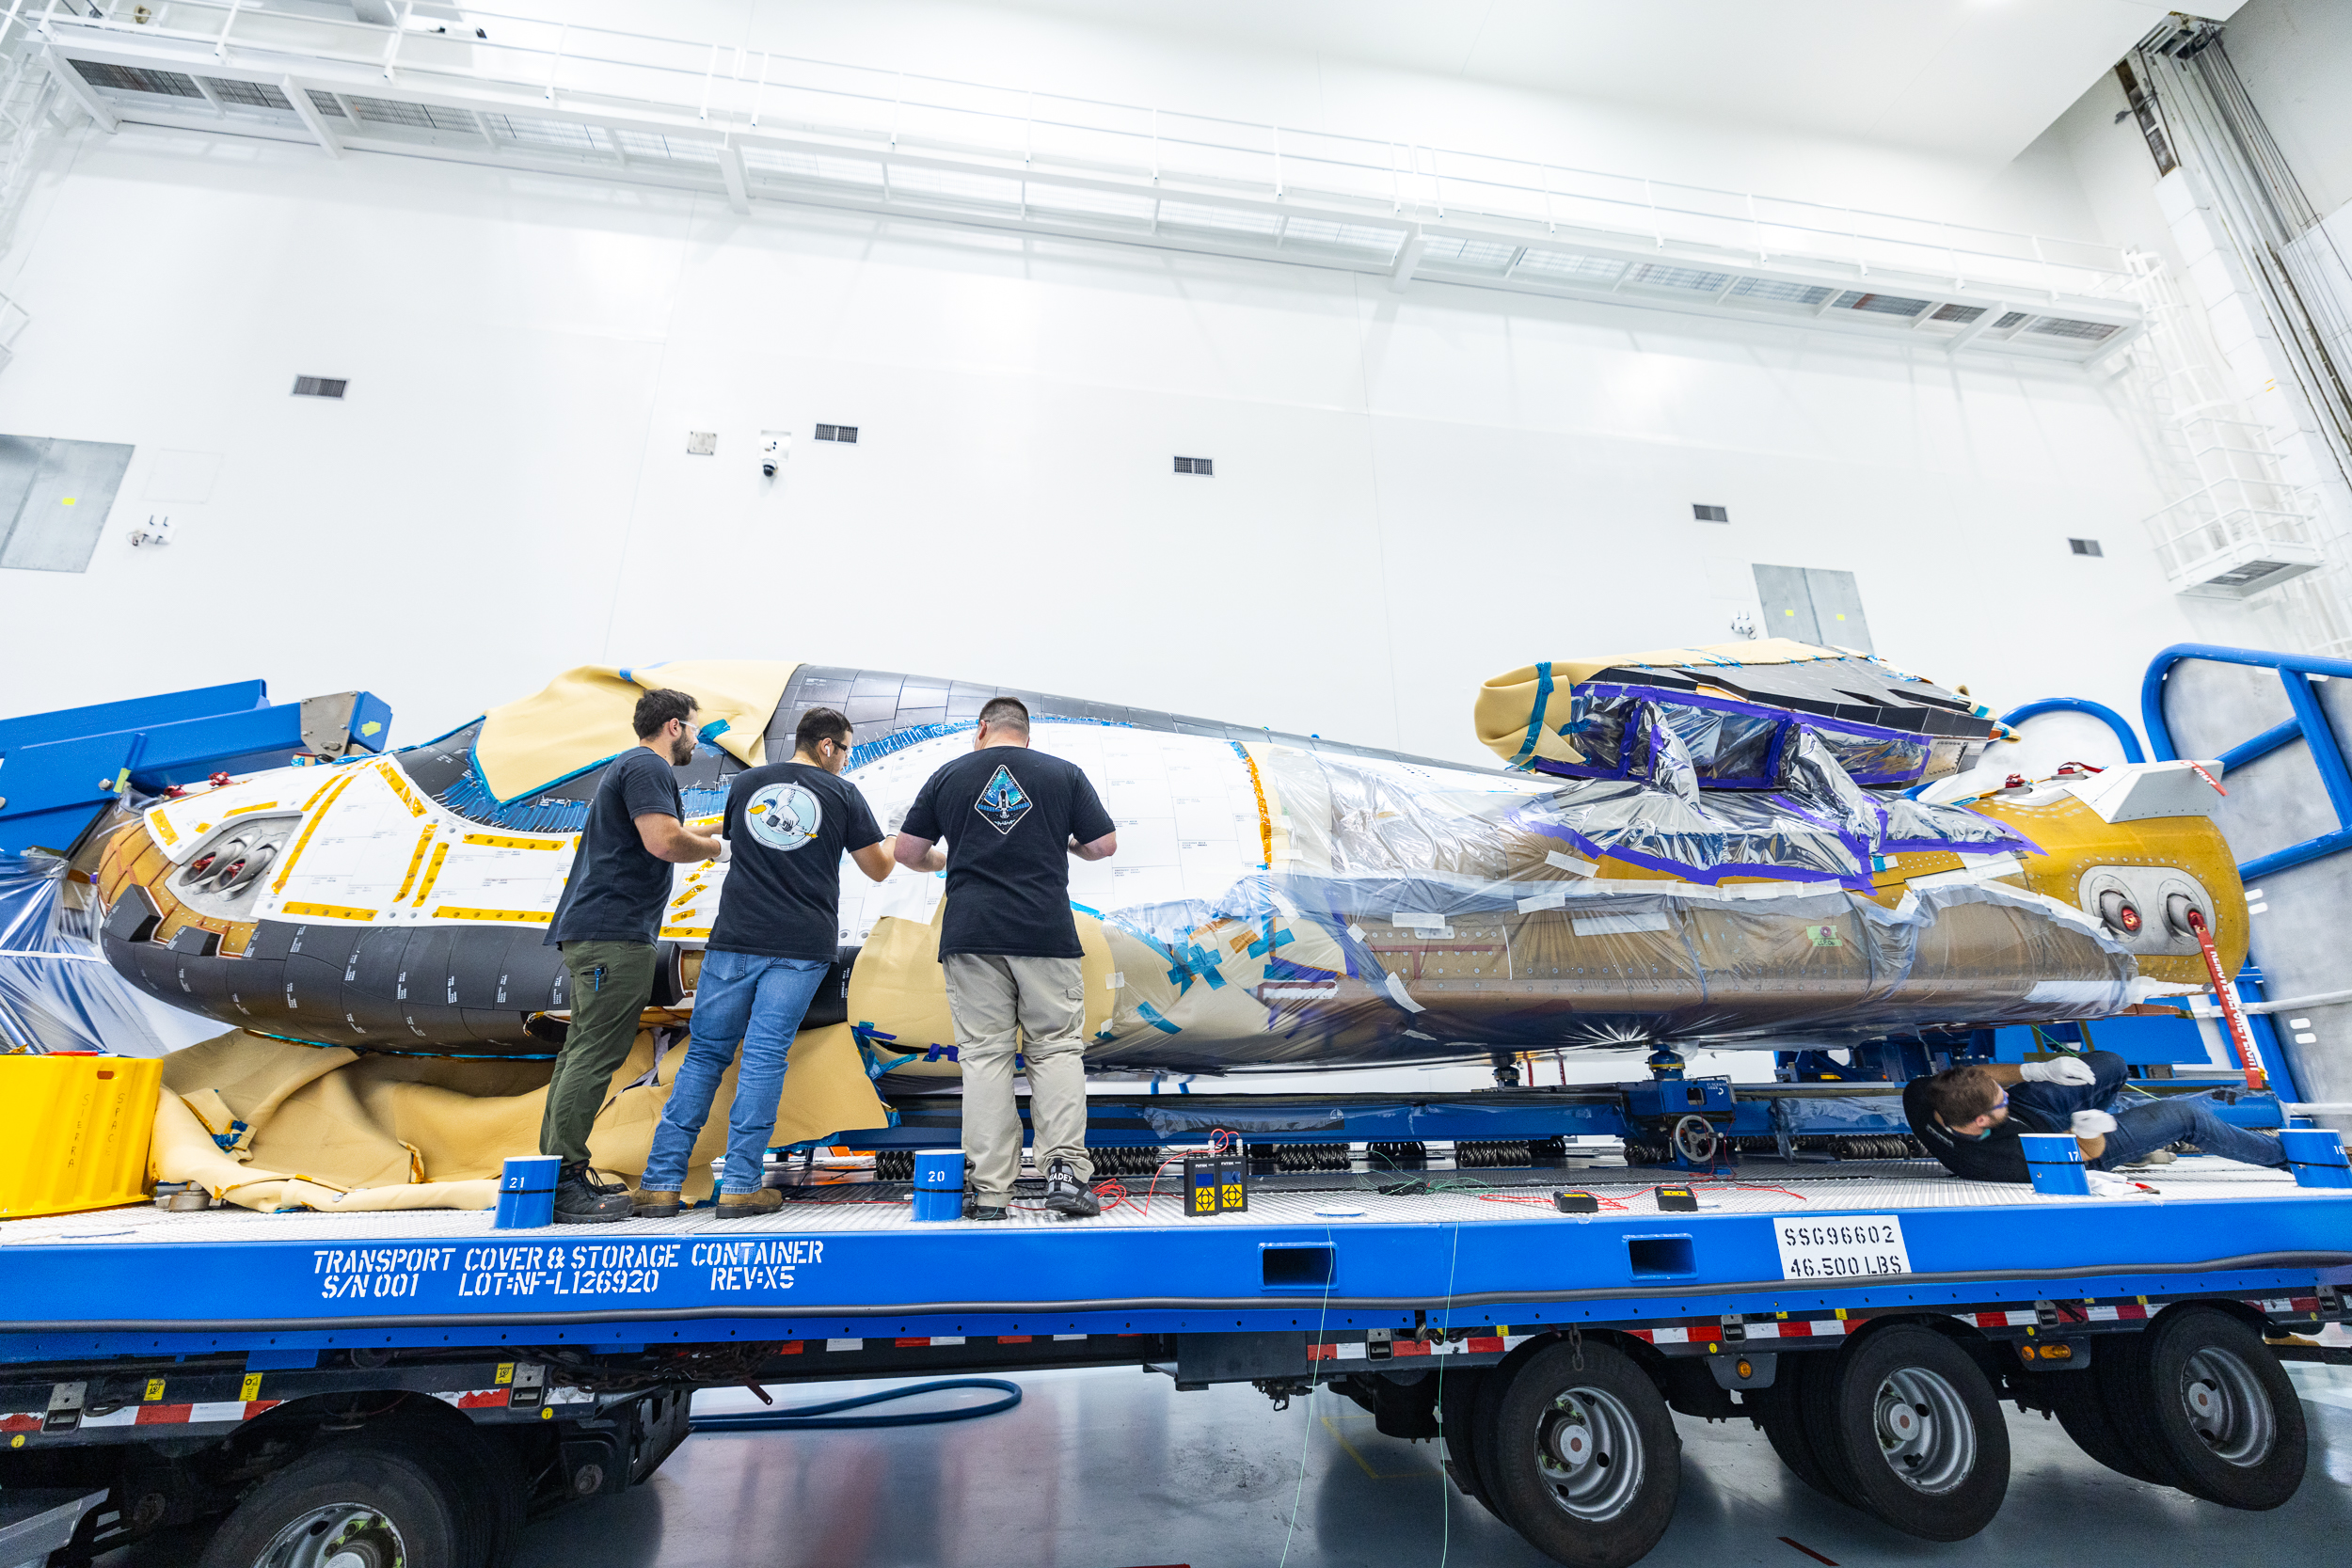 NASA and Sierra Space Transport Dream Chaser to Florida Ahead of Launch Preparations